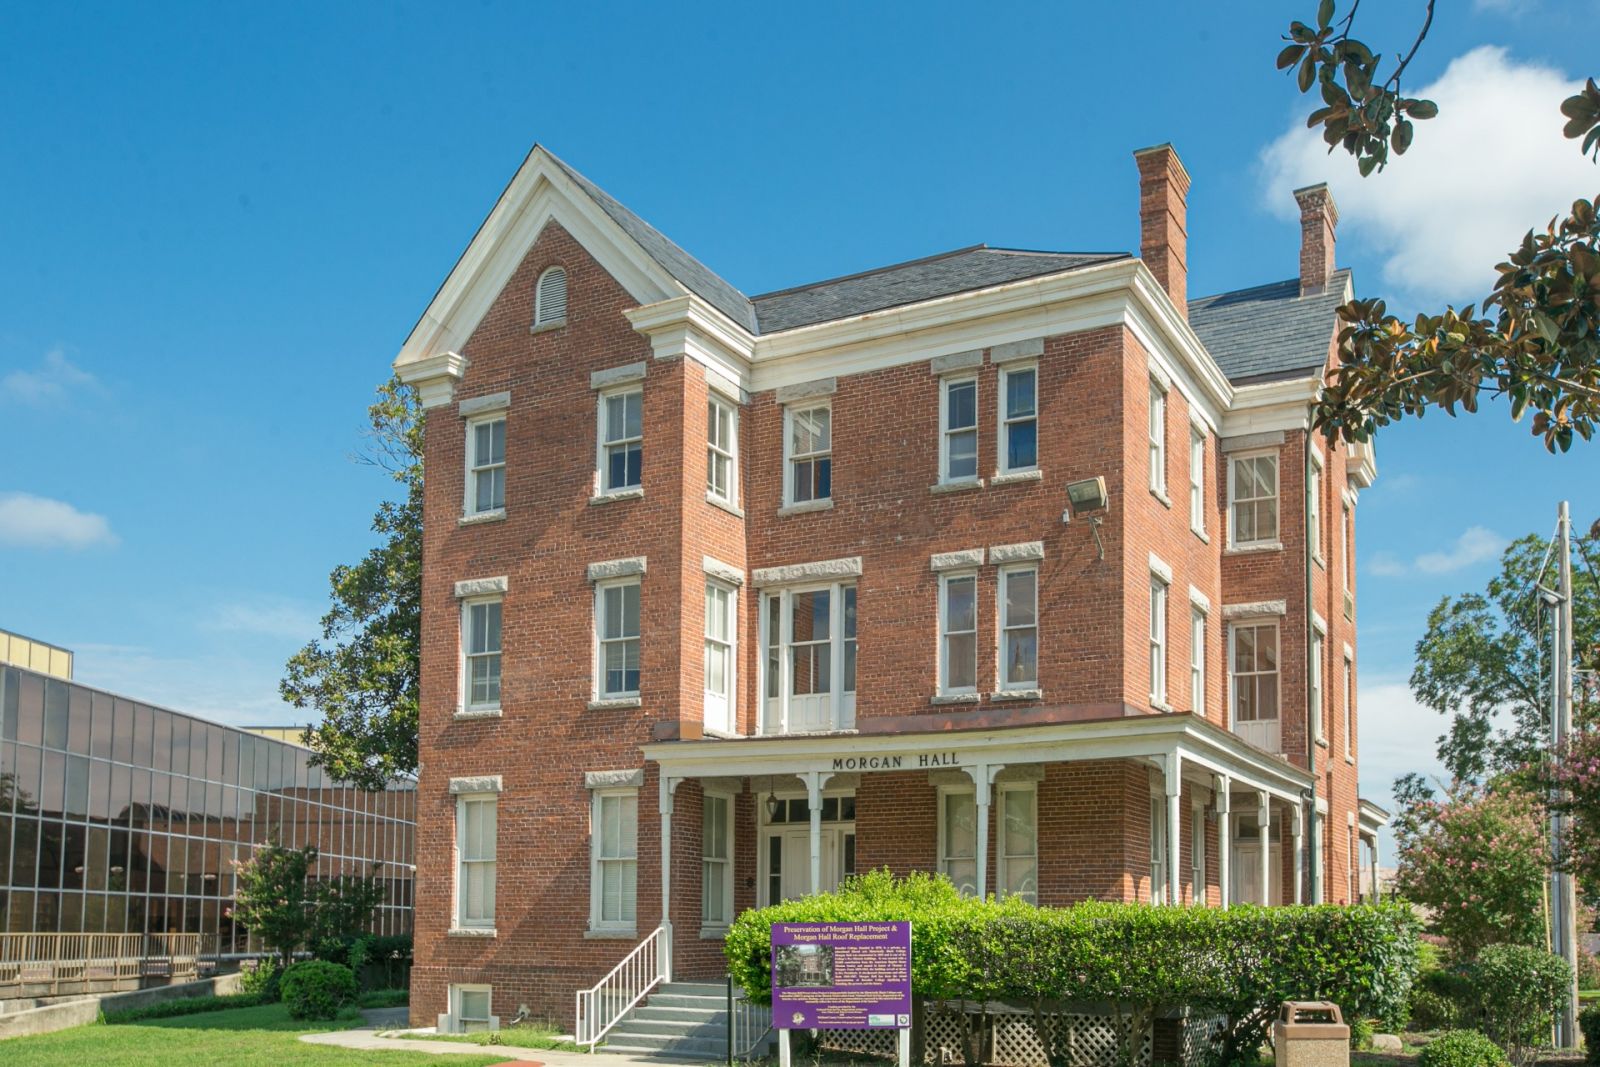 Benedict College will use a $500,000 grant from the National Park Service to continue rehabilitation efforts at Morgan Hall. (Photo/Provided)